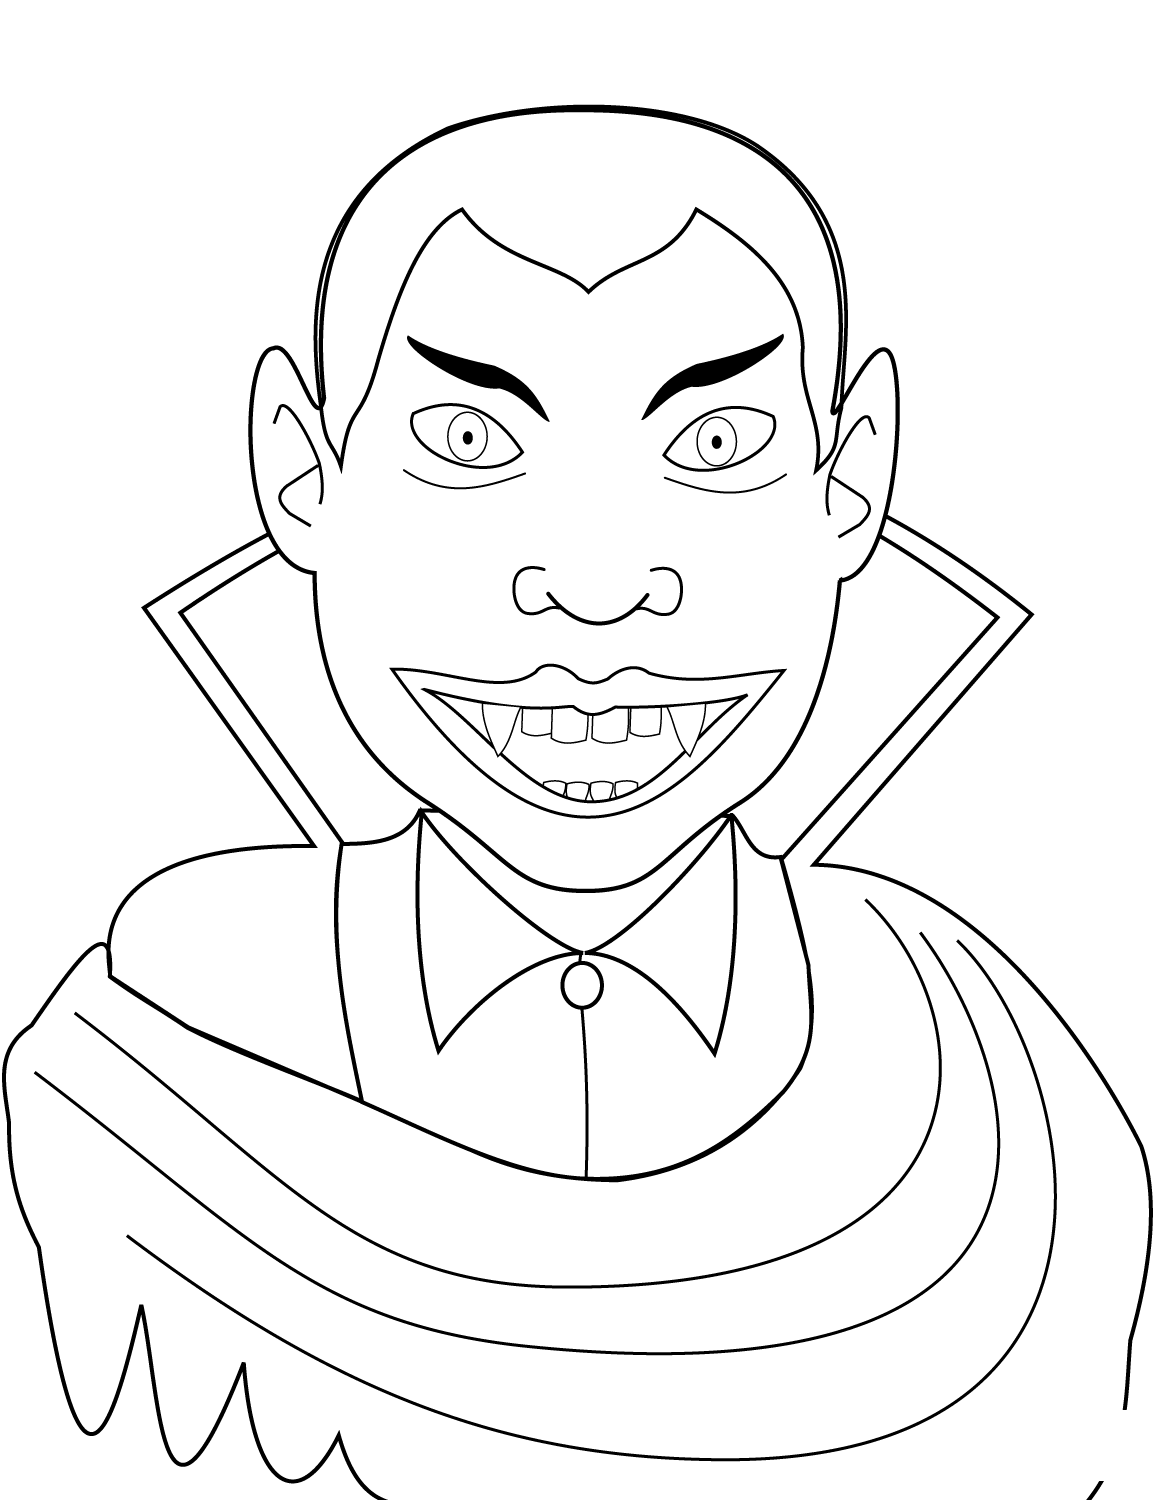 Count Dracula Halloween Coloring Page